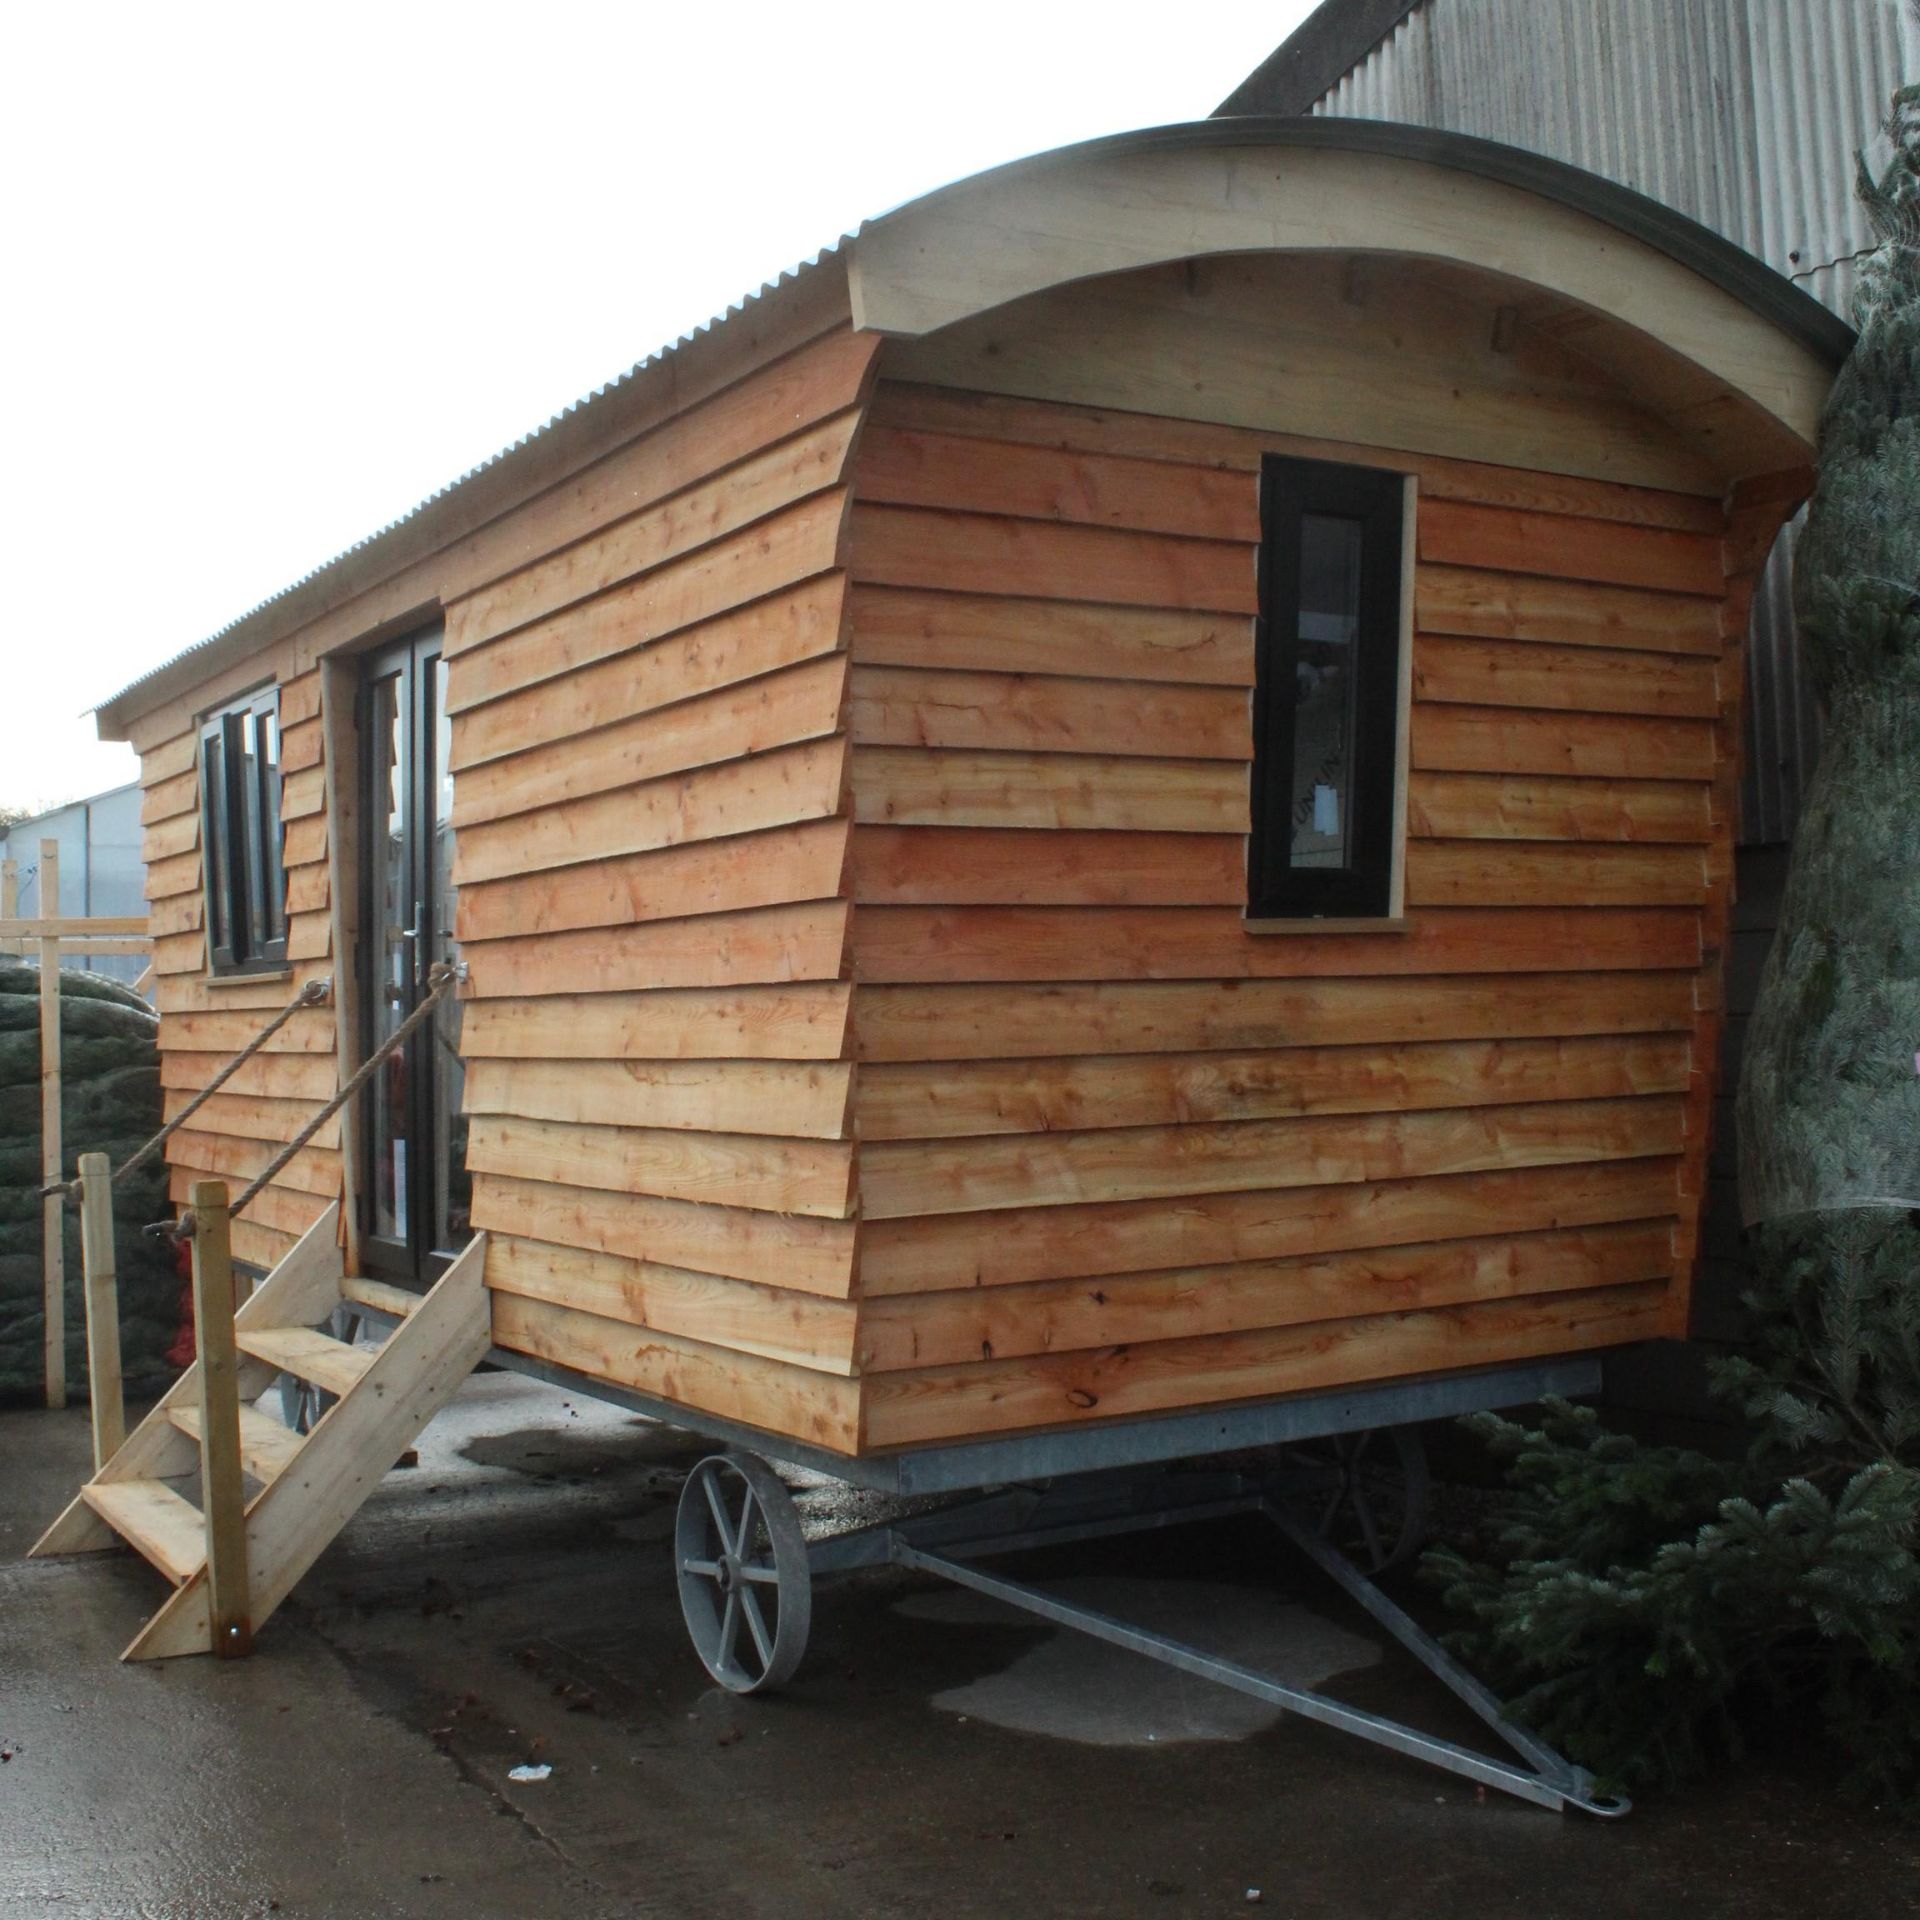 BRAND NEW EXTRA STRONG SHEPHERD HUT "PROVEN DESIGN" 23'6" X 9'6" AT EAVES. 75MM KINGSPAN IN THE - Image 8 of 9